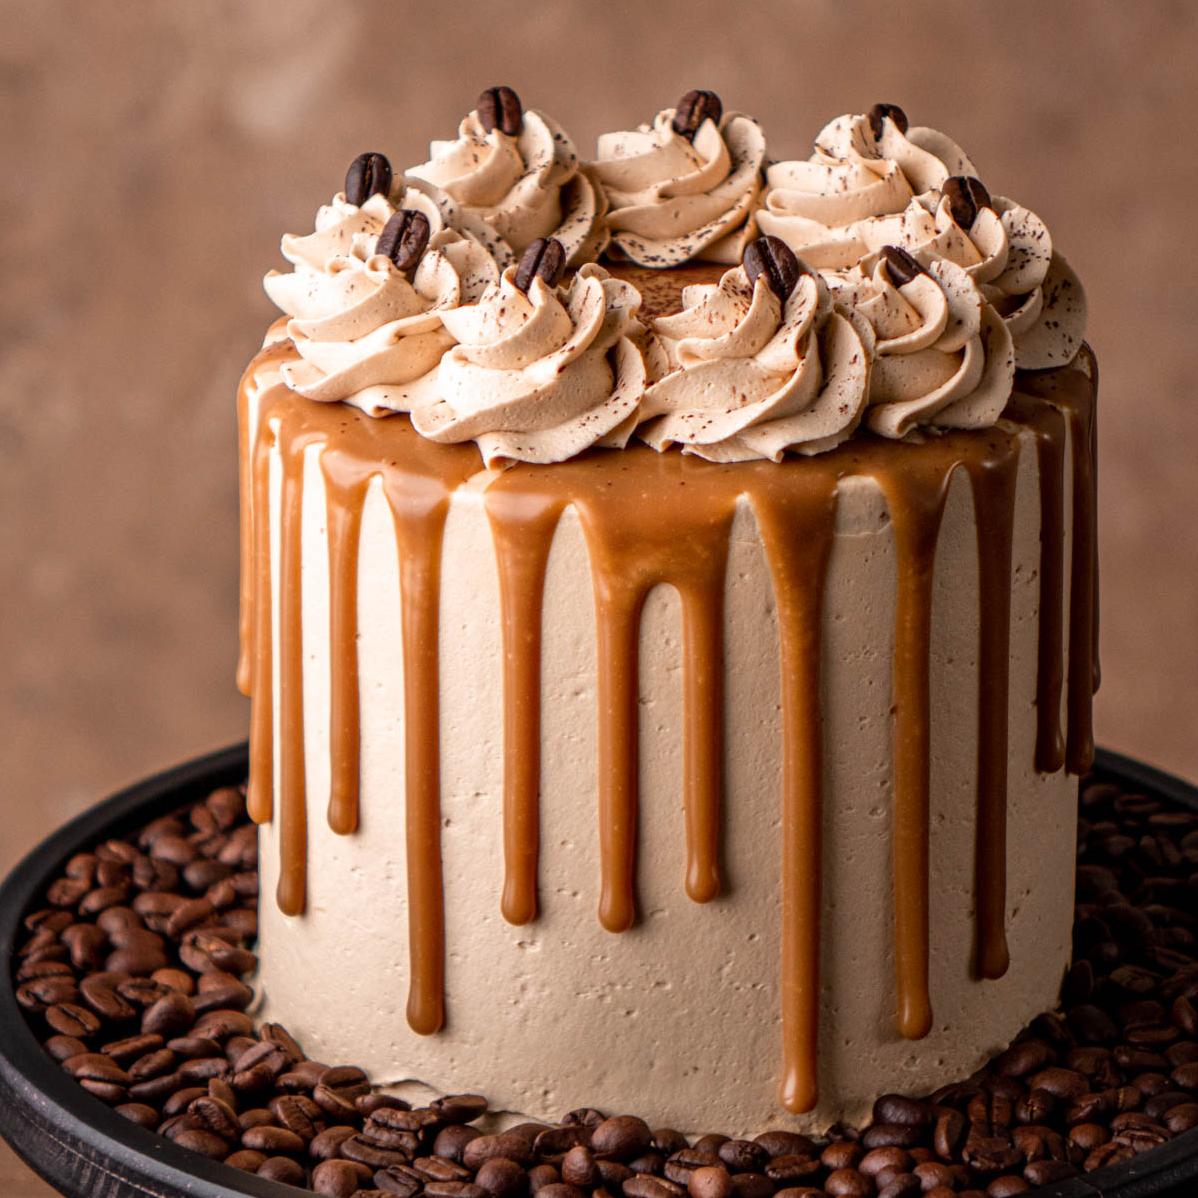  Savory and sweet creamy cappuccino cakes to fulfill your coffee cravings